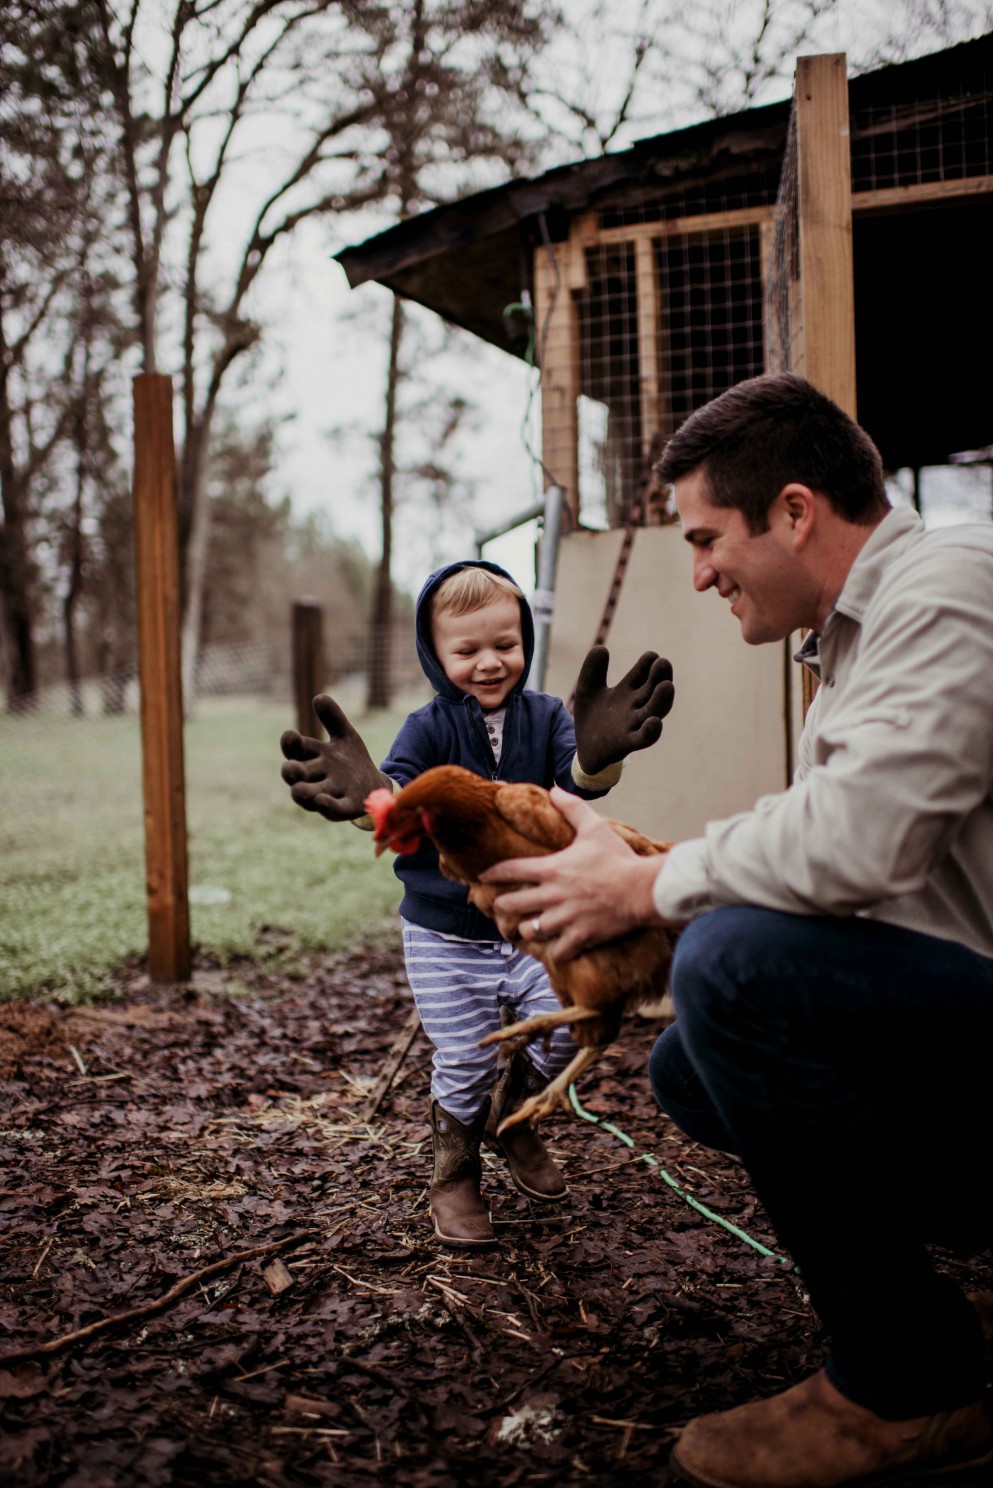 Kids with Chickens